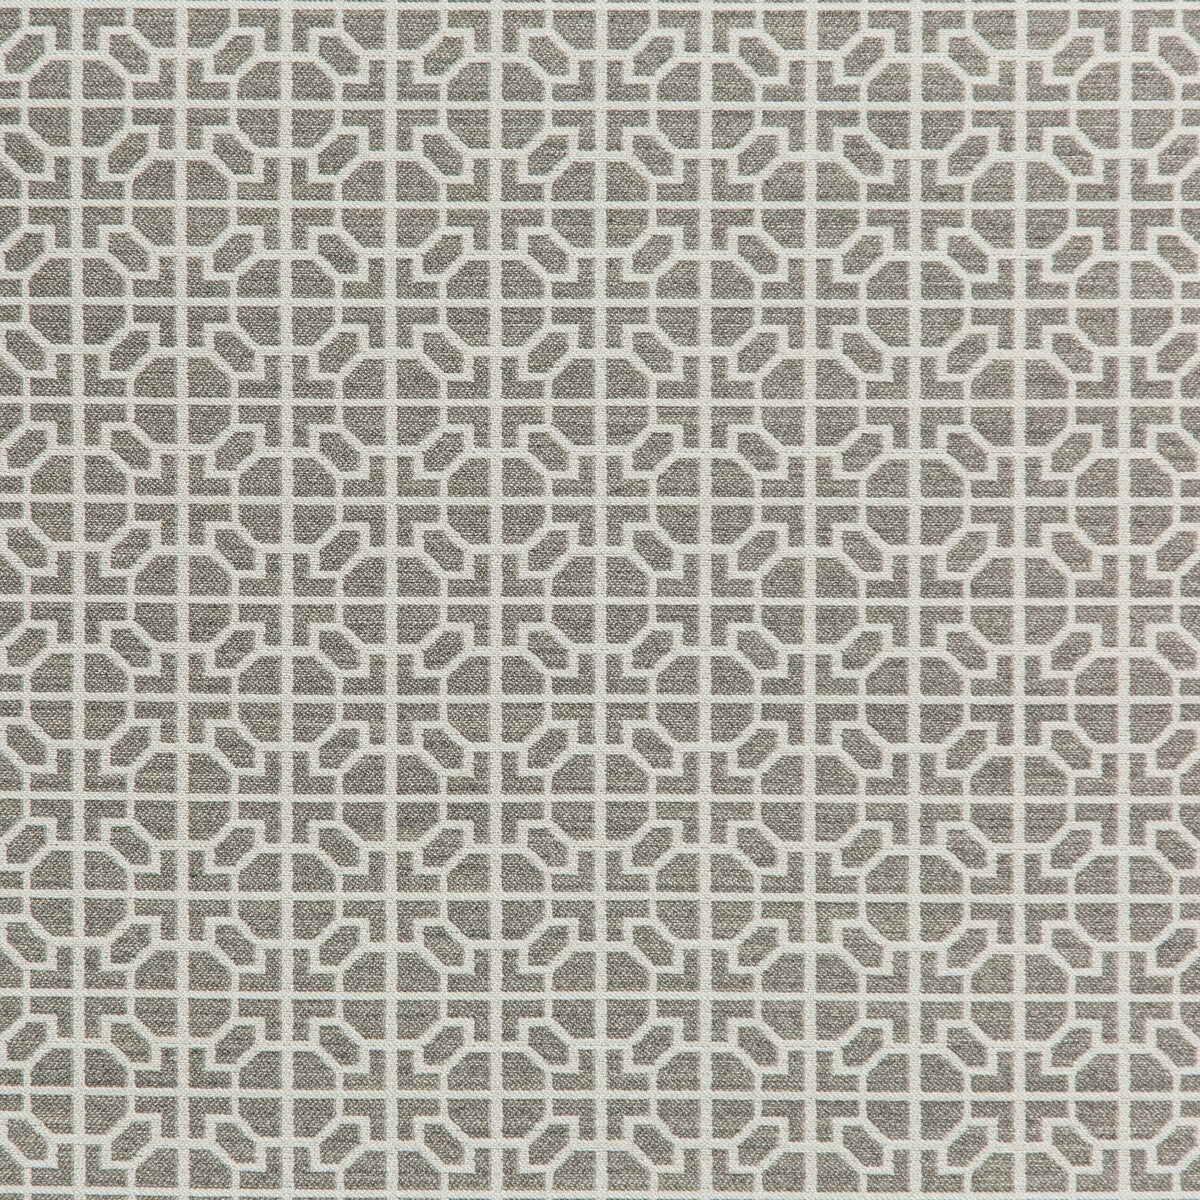 Raia fabric in stone color - pattern 35820.11.0 - by Kravet Design in the Indoor / Outdoor collection